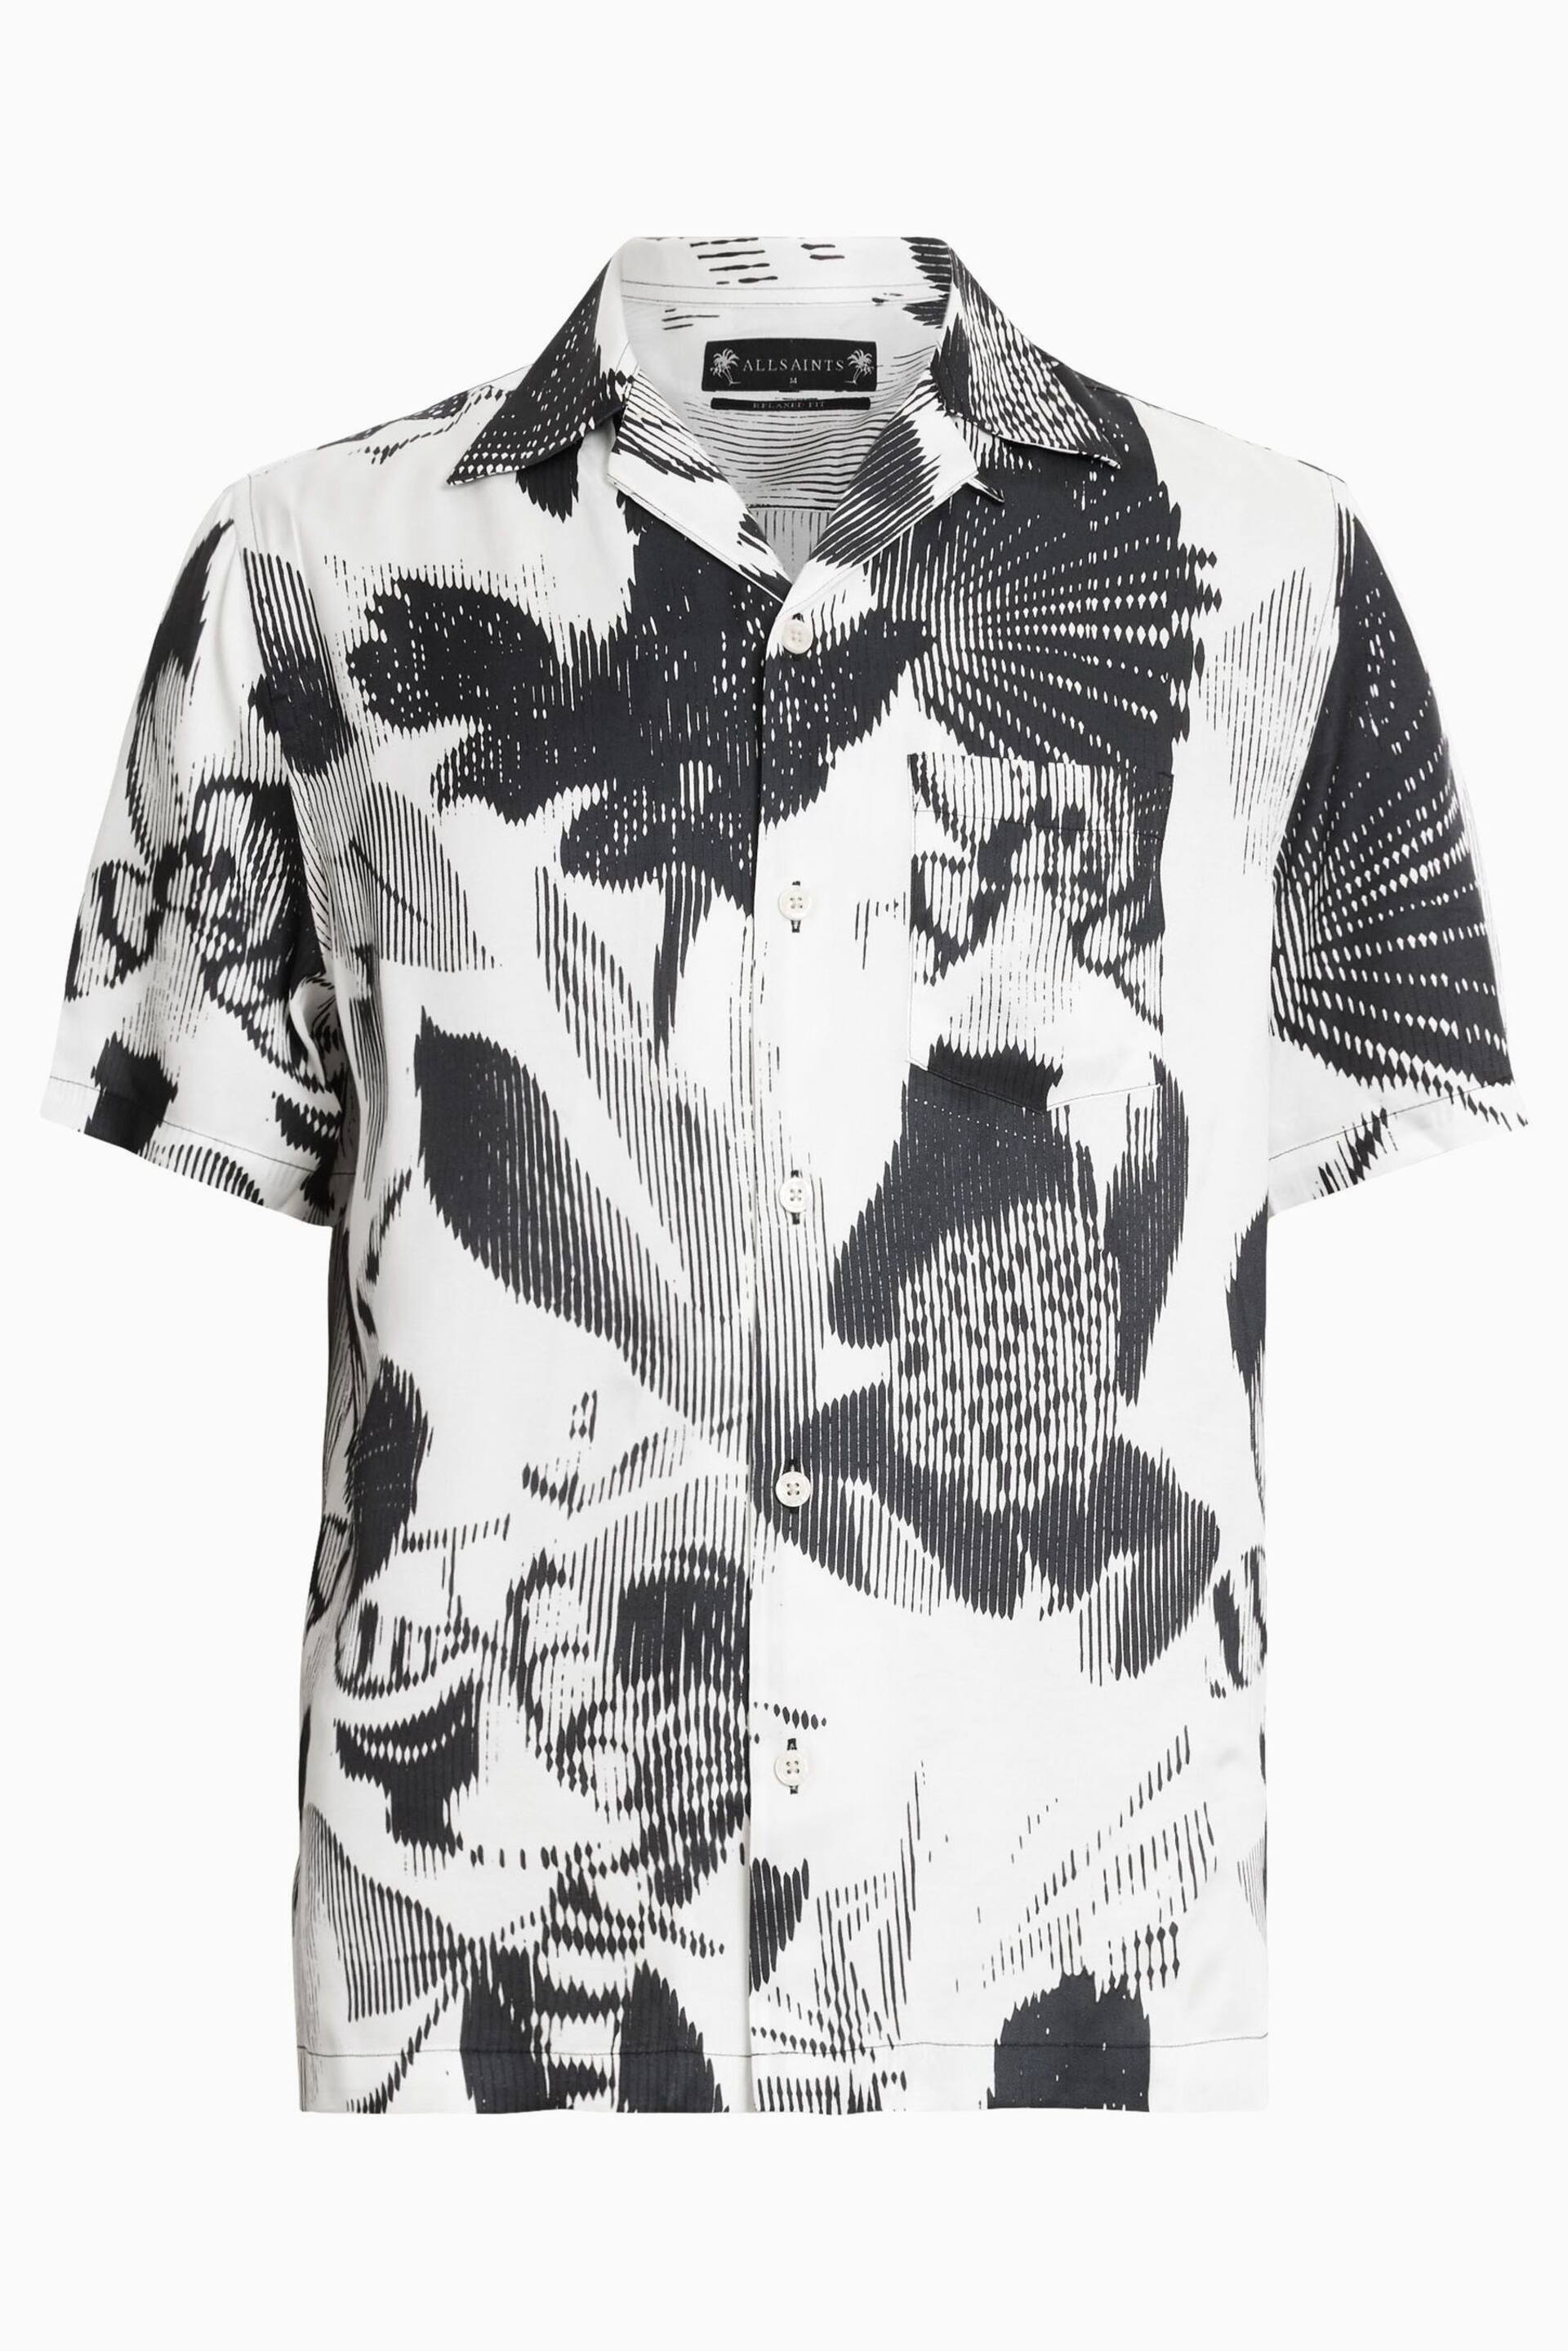 AllSaints White Frequency Shirt - Image 7 of 7